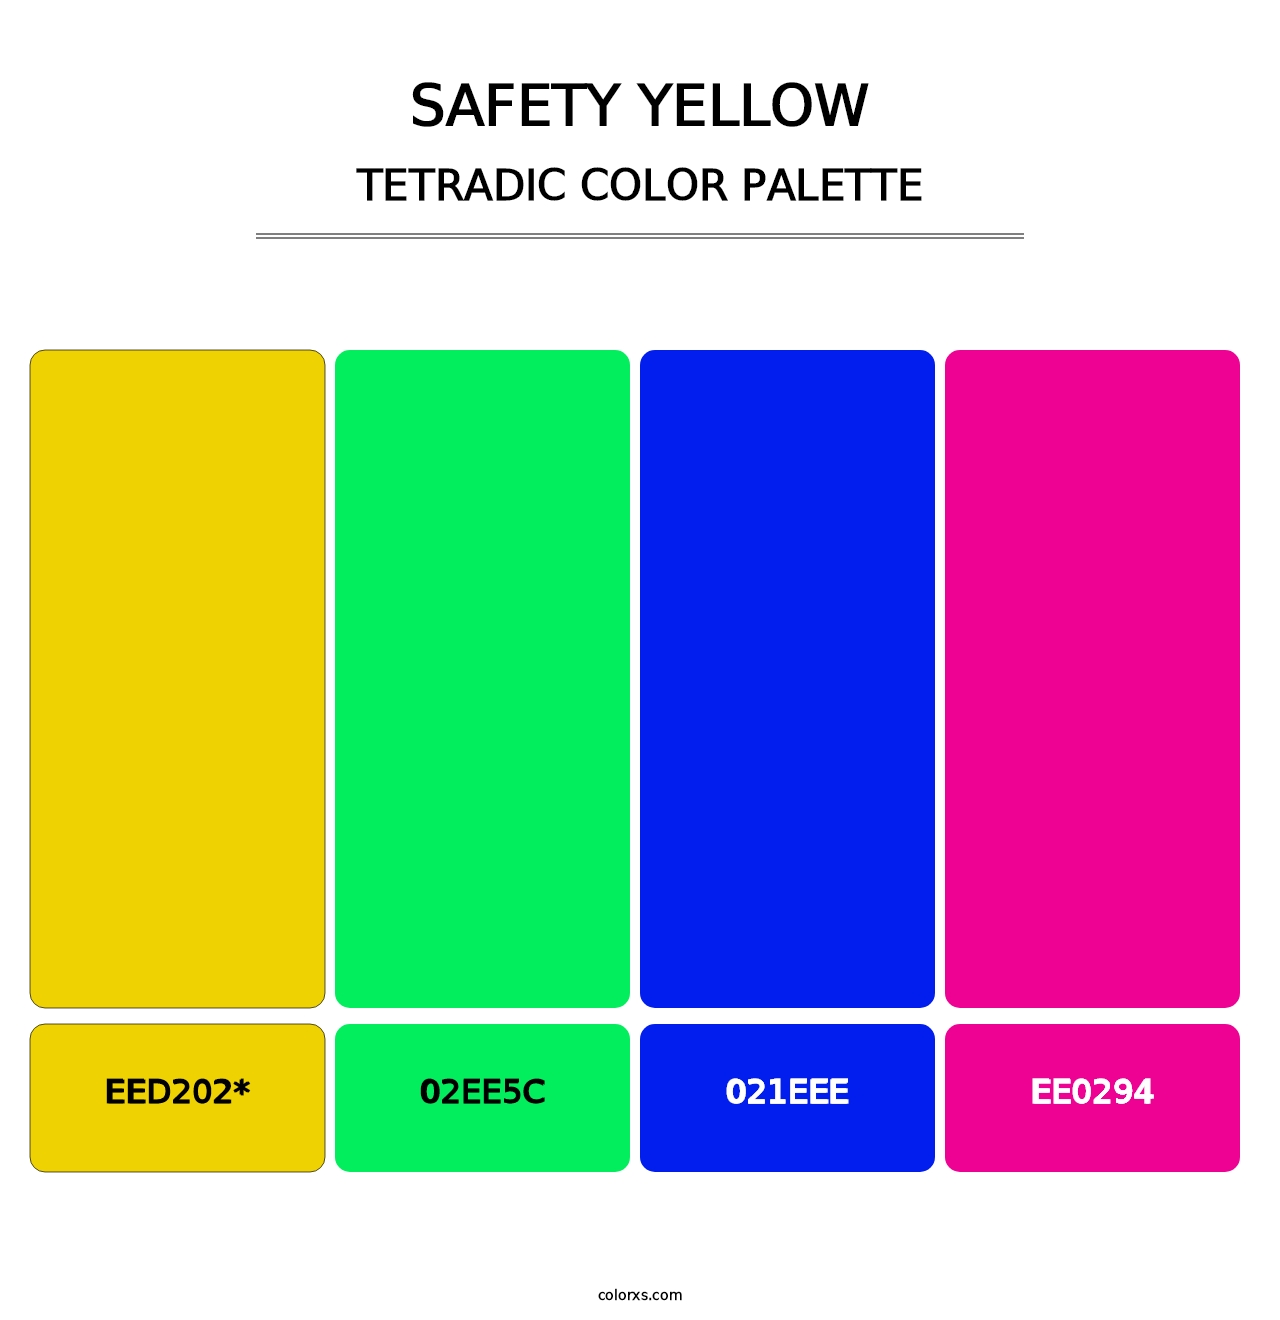 Safety Yellow - Tetradic Color Palette